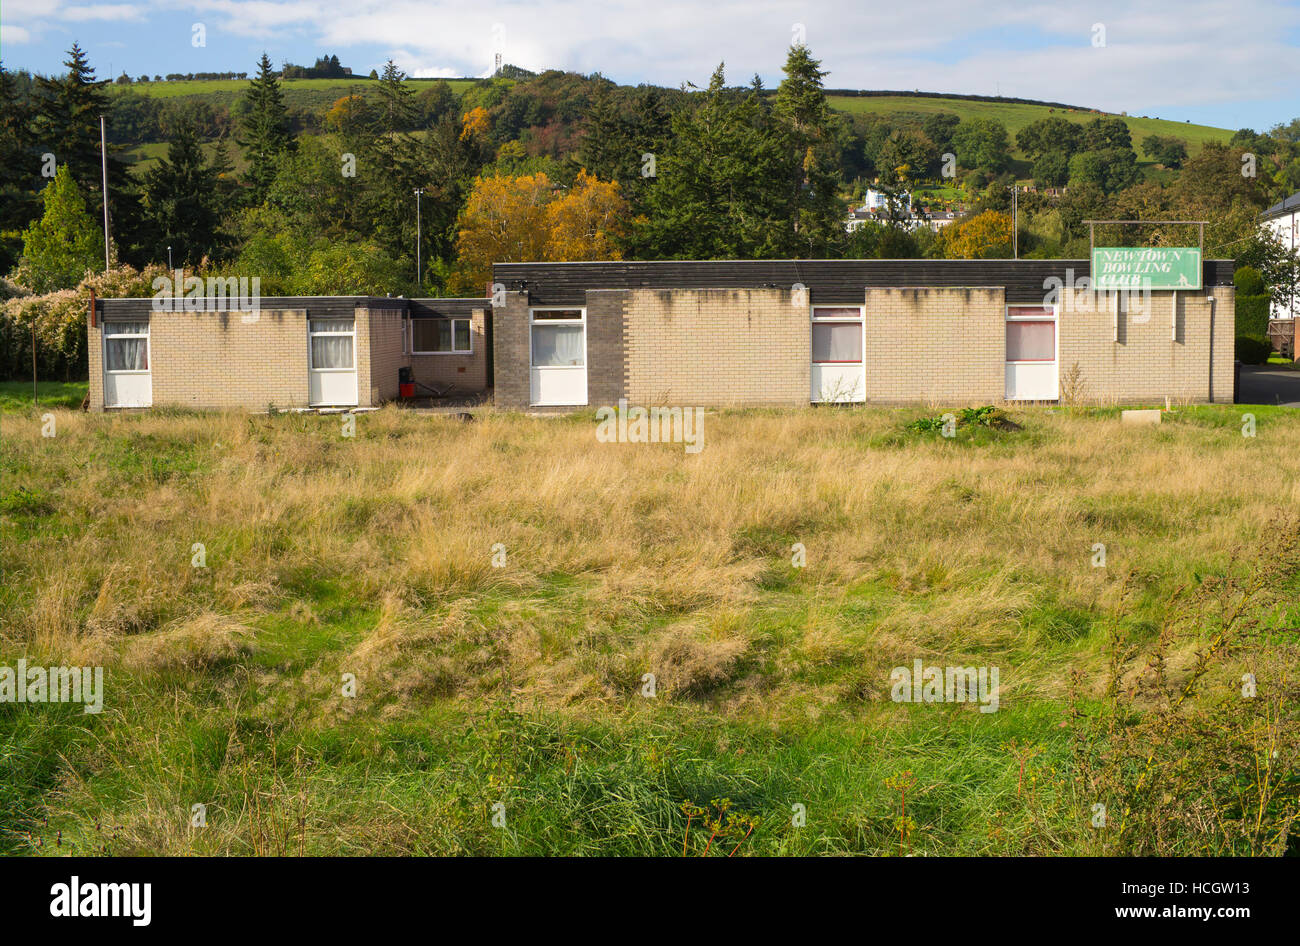 Newtown Back Lane bowling club bowling green with overgrown grass, Powys Wales UK Stock Photo